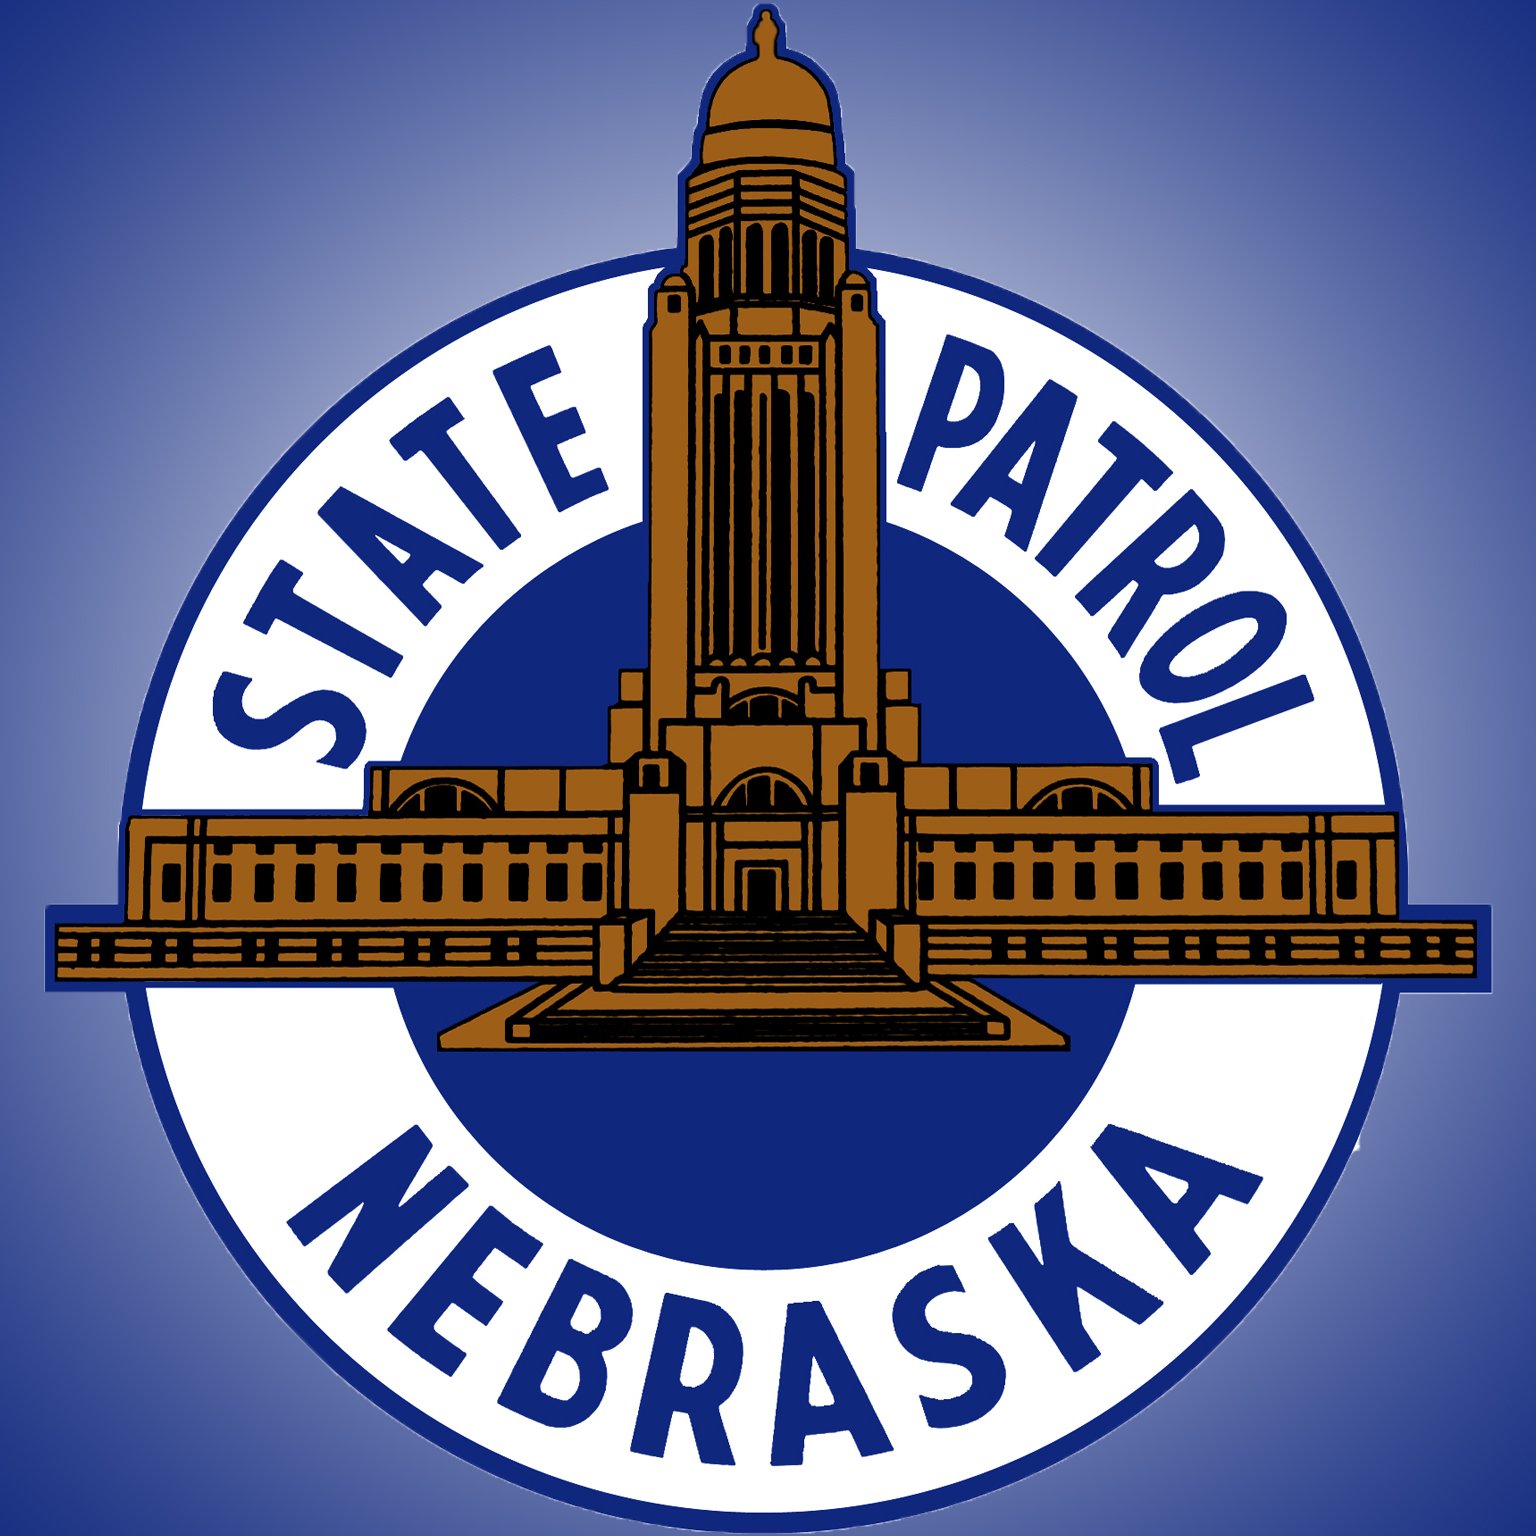 Nebraska State Patrol Investigators based in Omaha - Troop A. 

Account not monitored 24/7. Report emergencies to 911. 

Send tips to 402-331-3333.